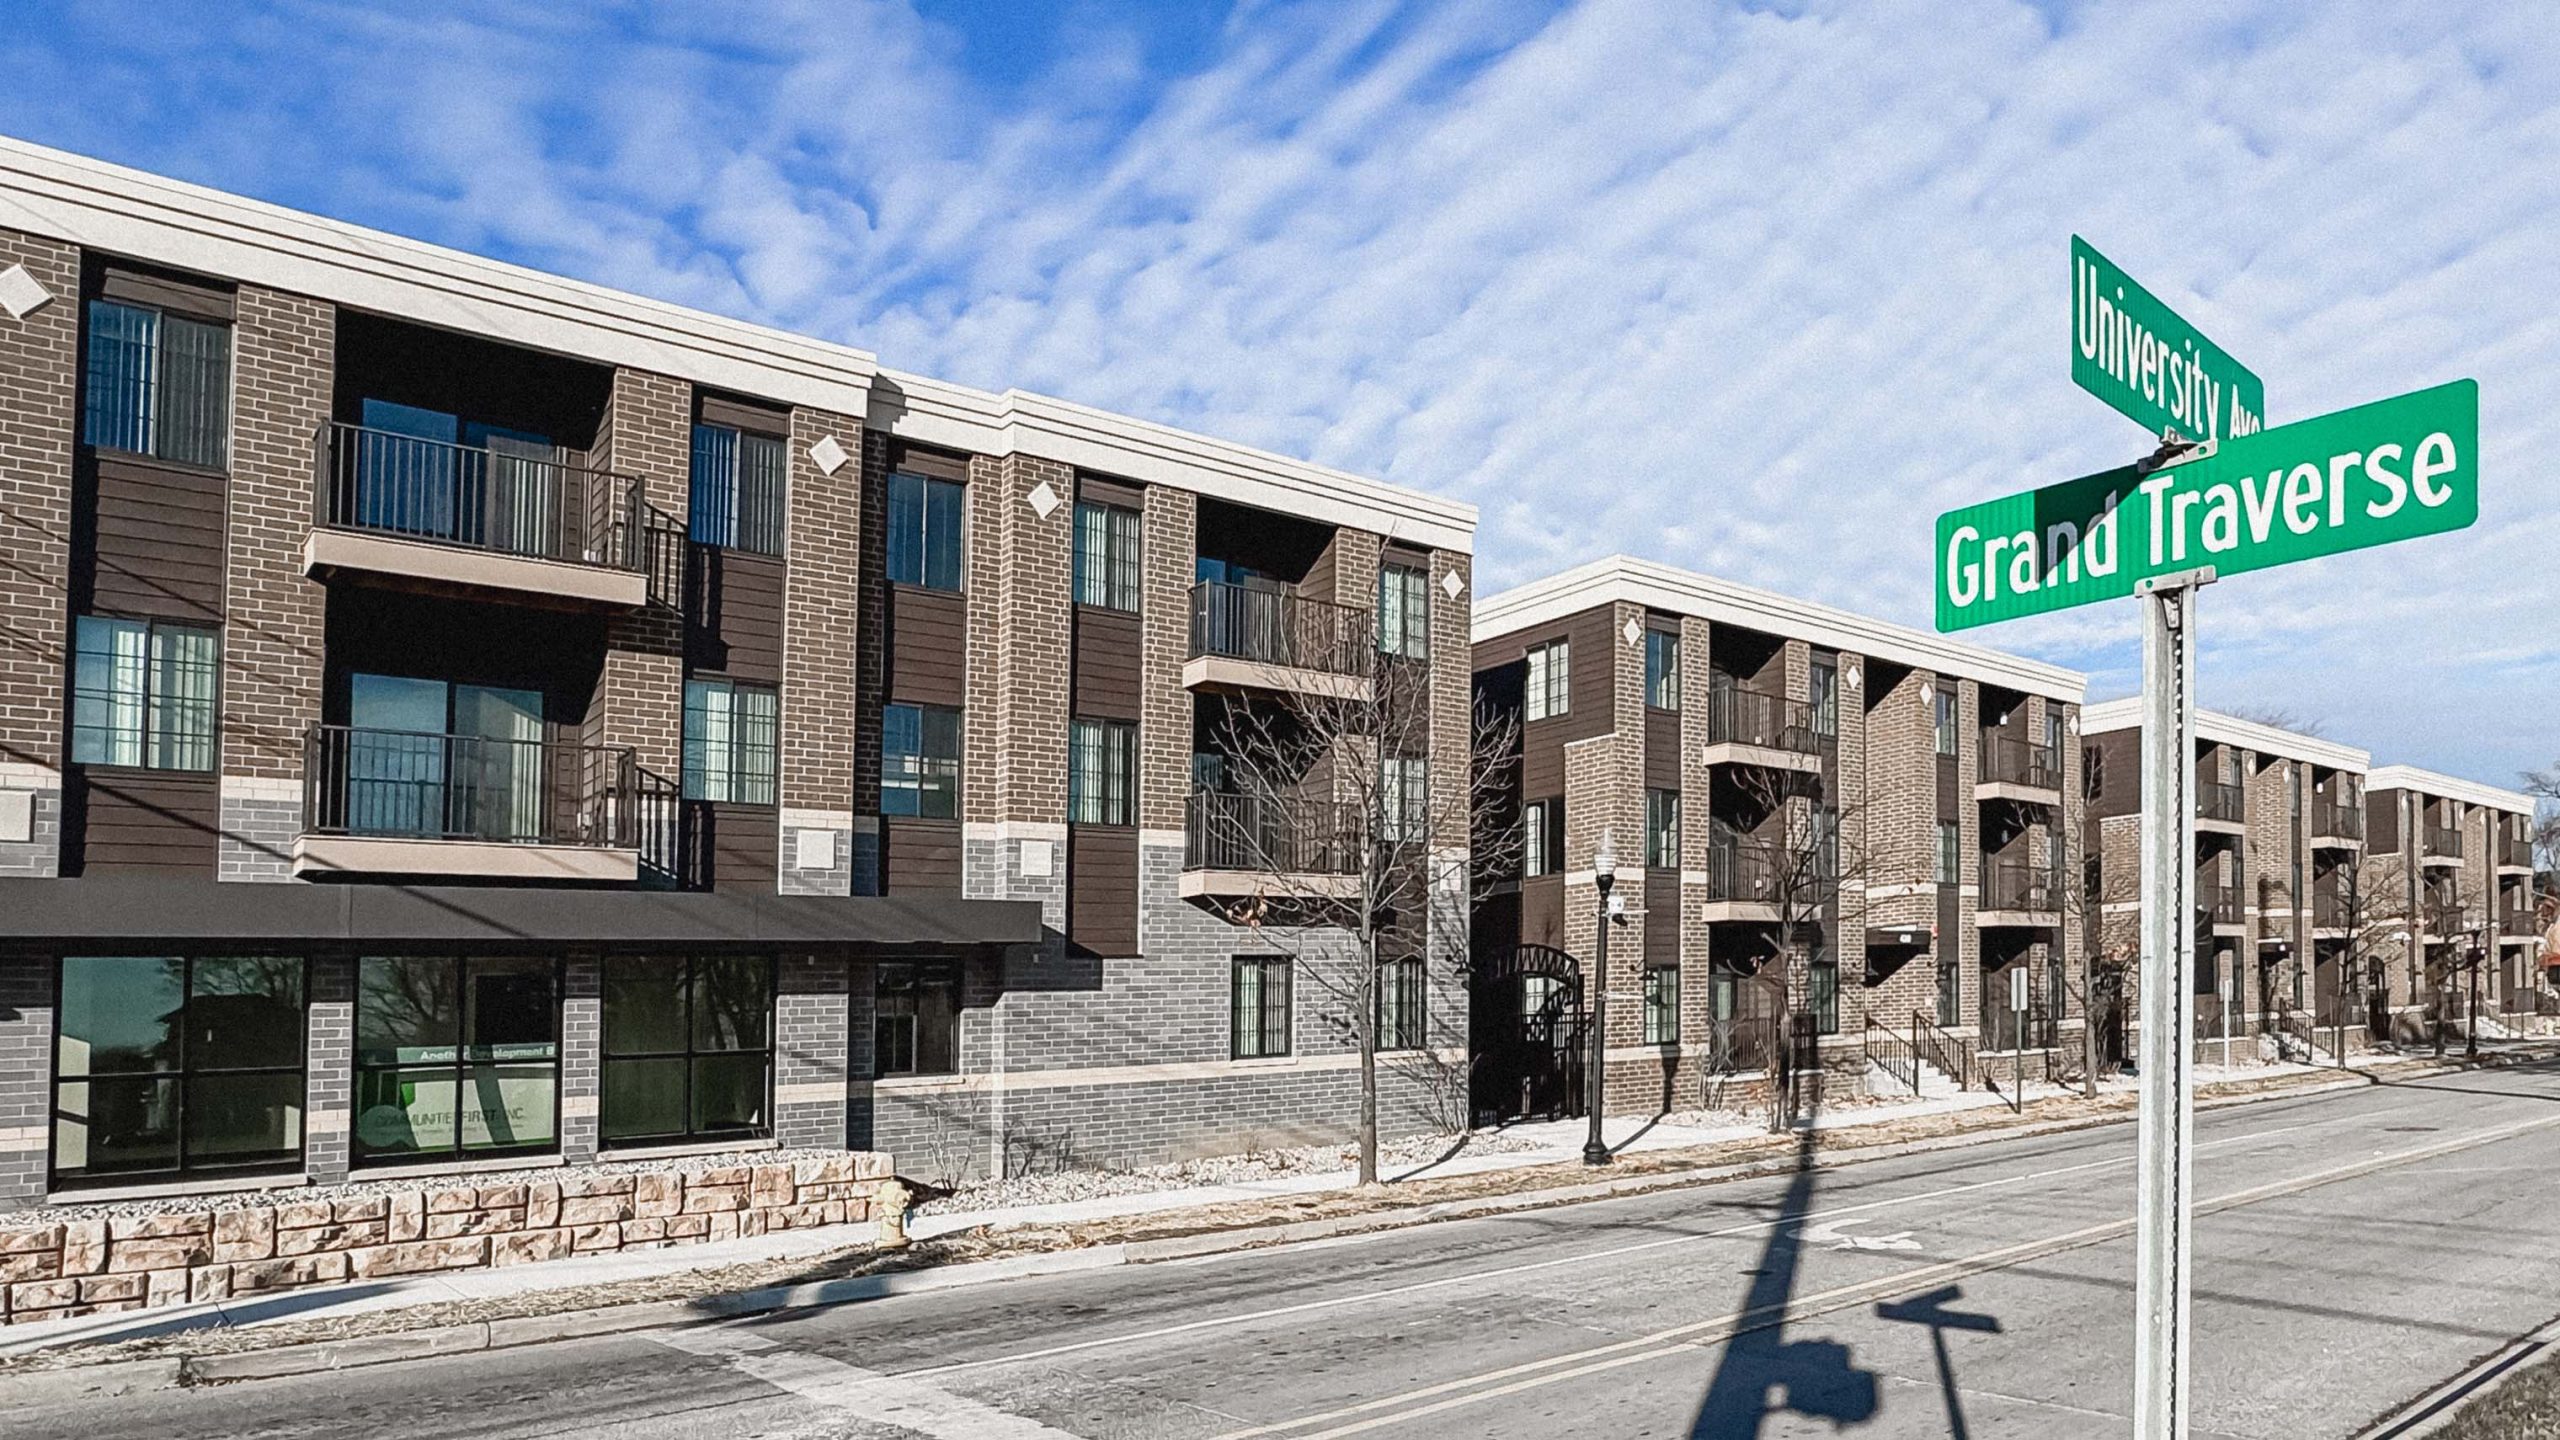 Street view of the Grand on University, a brick mixed-use, mixed-income development in Carriage town. The street sign locates this at University Ave. and Grand Traverse.